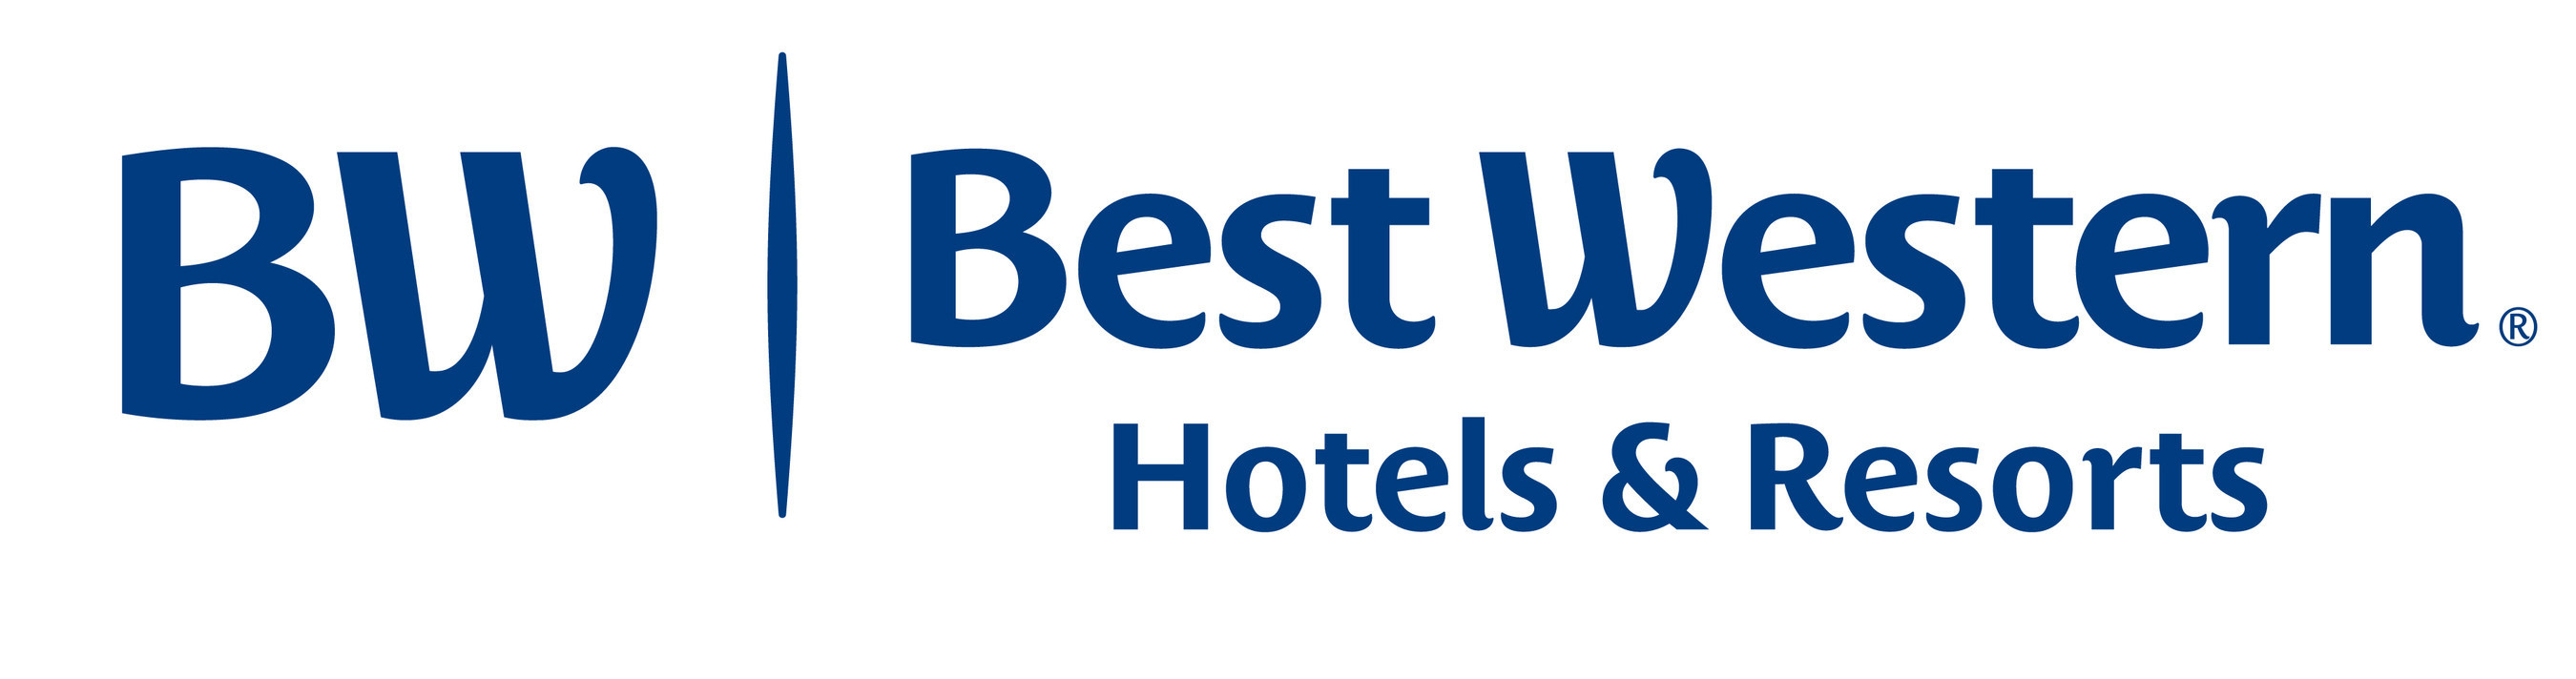 Iconic Stratosphere And Aquarius Hotels Join Best Western® Hotels & Resorts